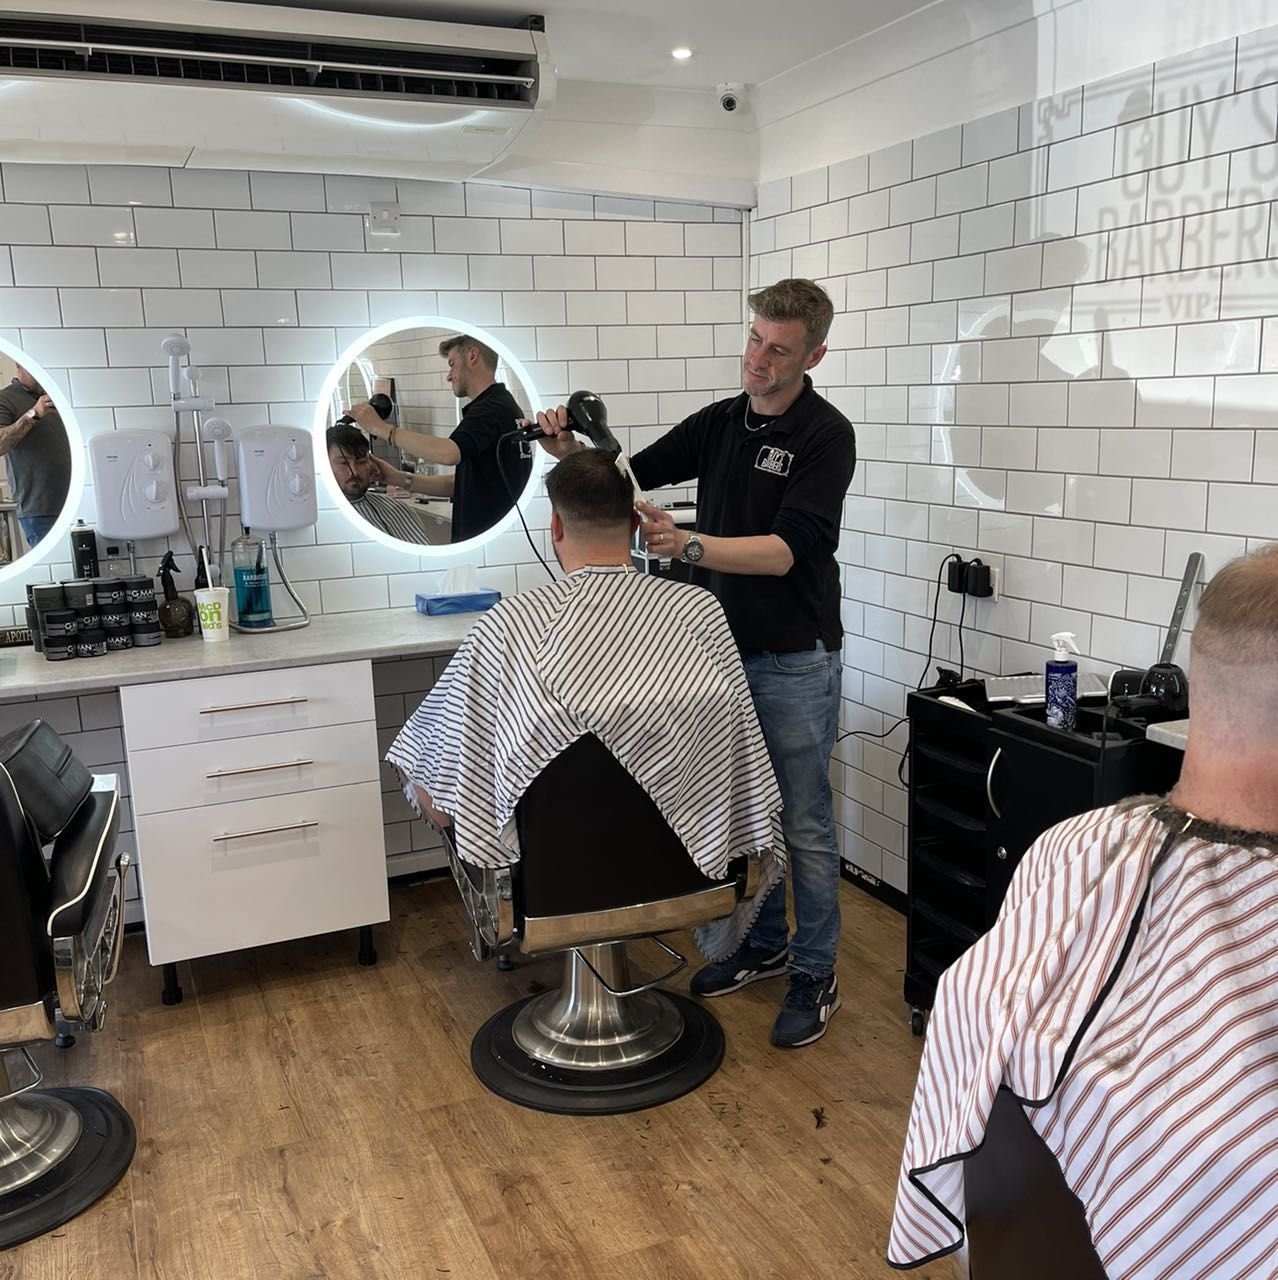 Donnie Manager - Guy’s Gentlemens Barbers Shop